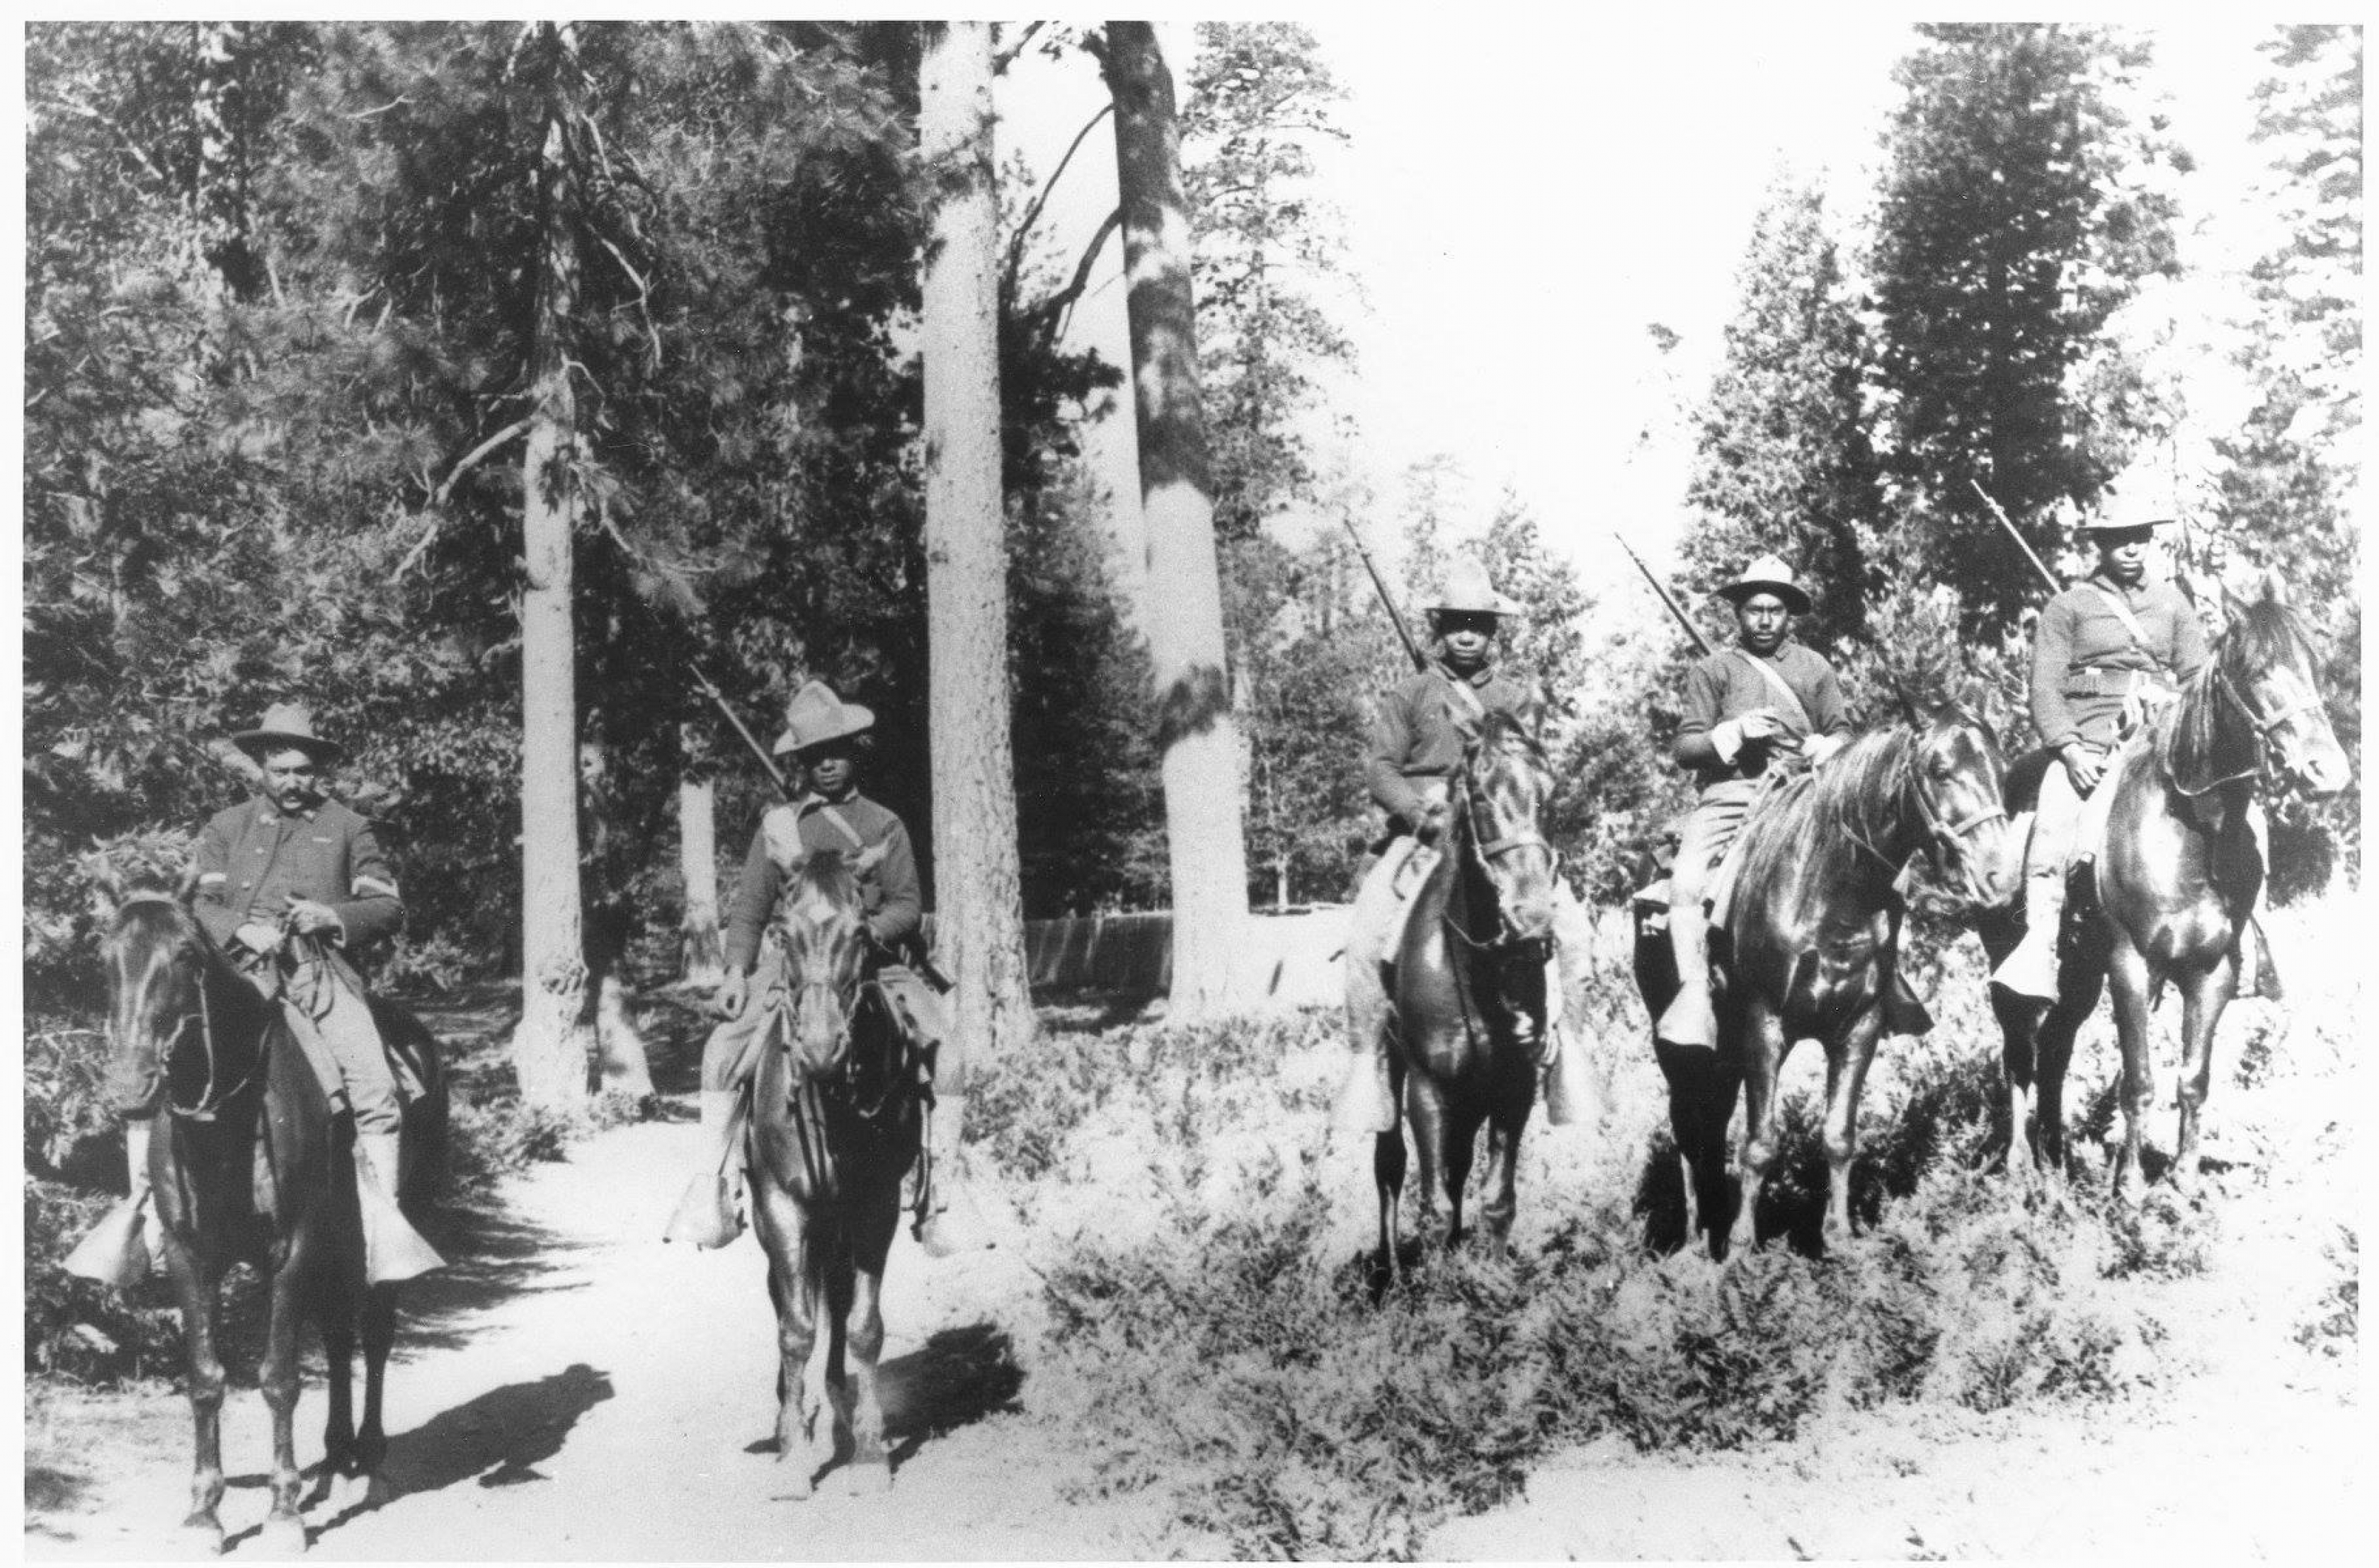 Historic black and white photo of the 24th Infantry Buffalo Soldiers on horseback patrolling in the woods of Yosemite National Park